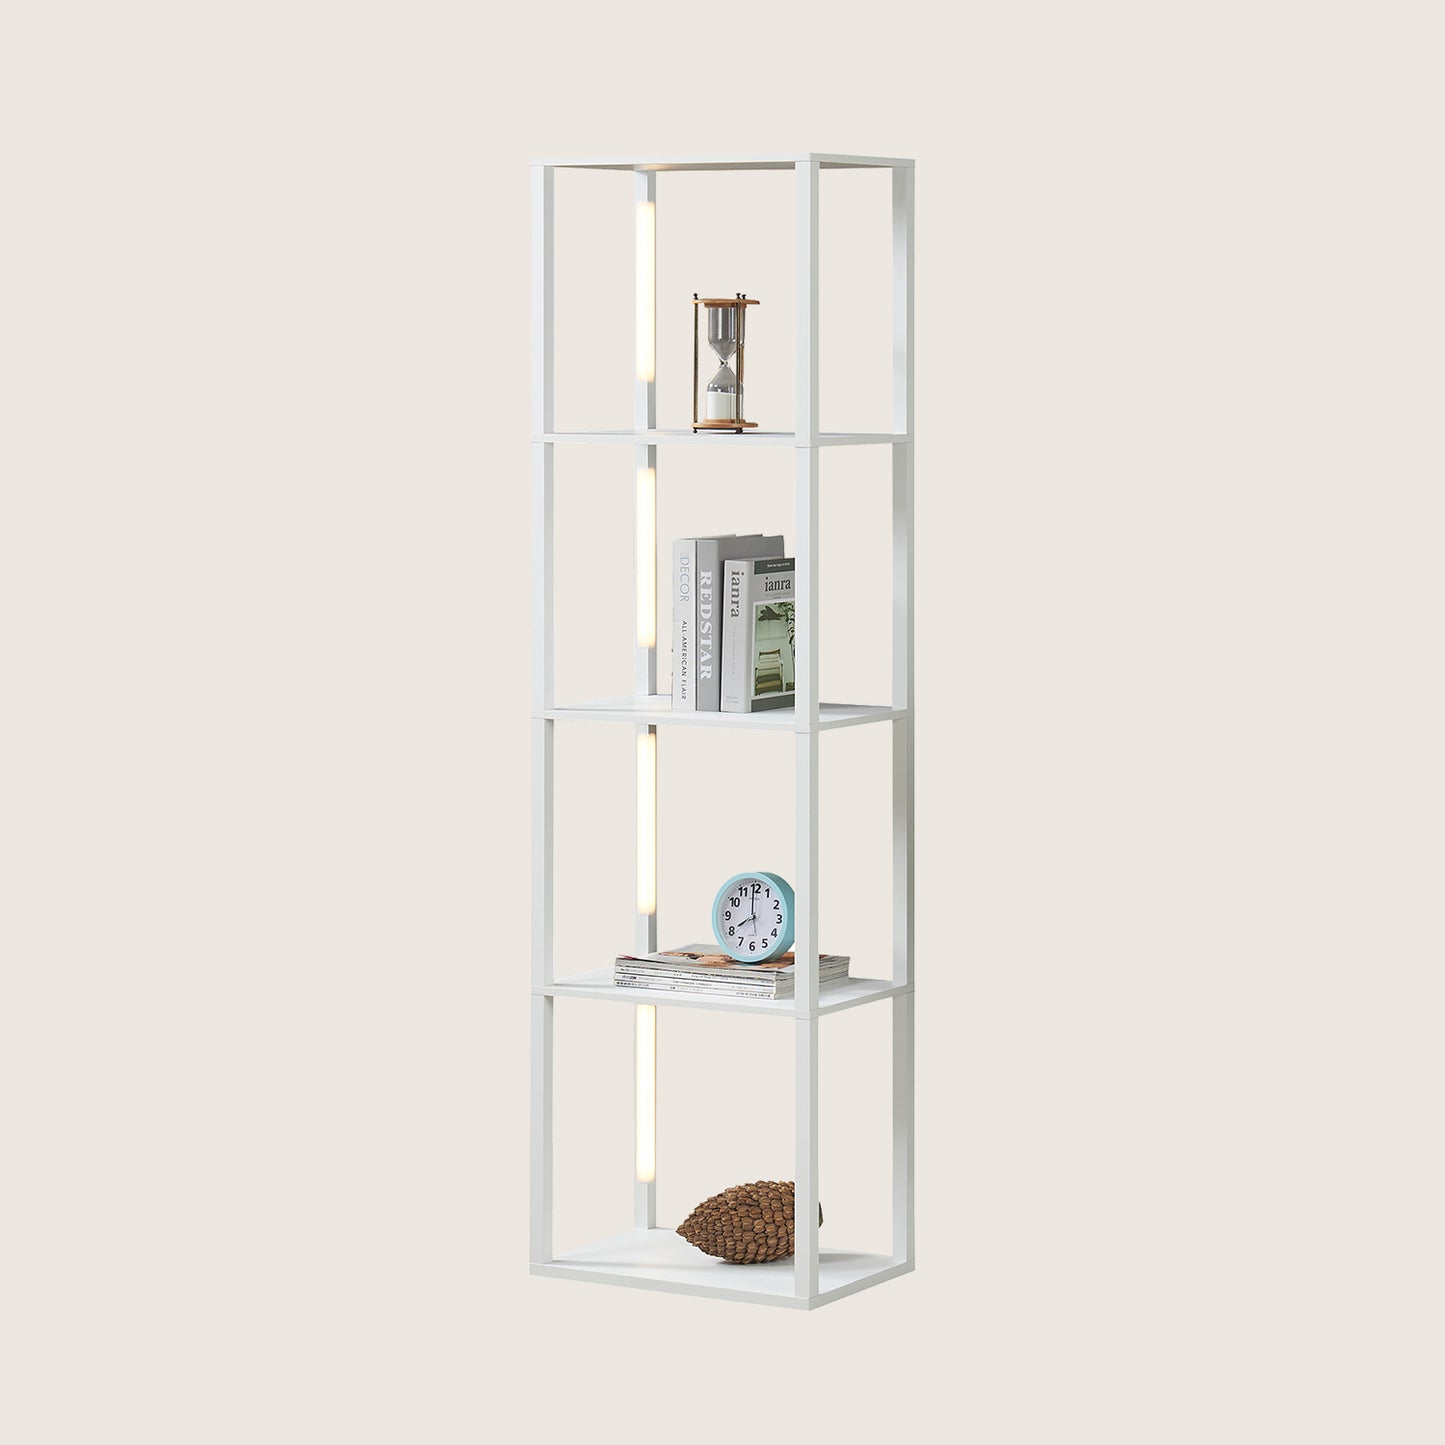 FENLO Fancy Plus Wide Display Shelves With Integrated LED Lighting